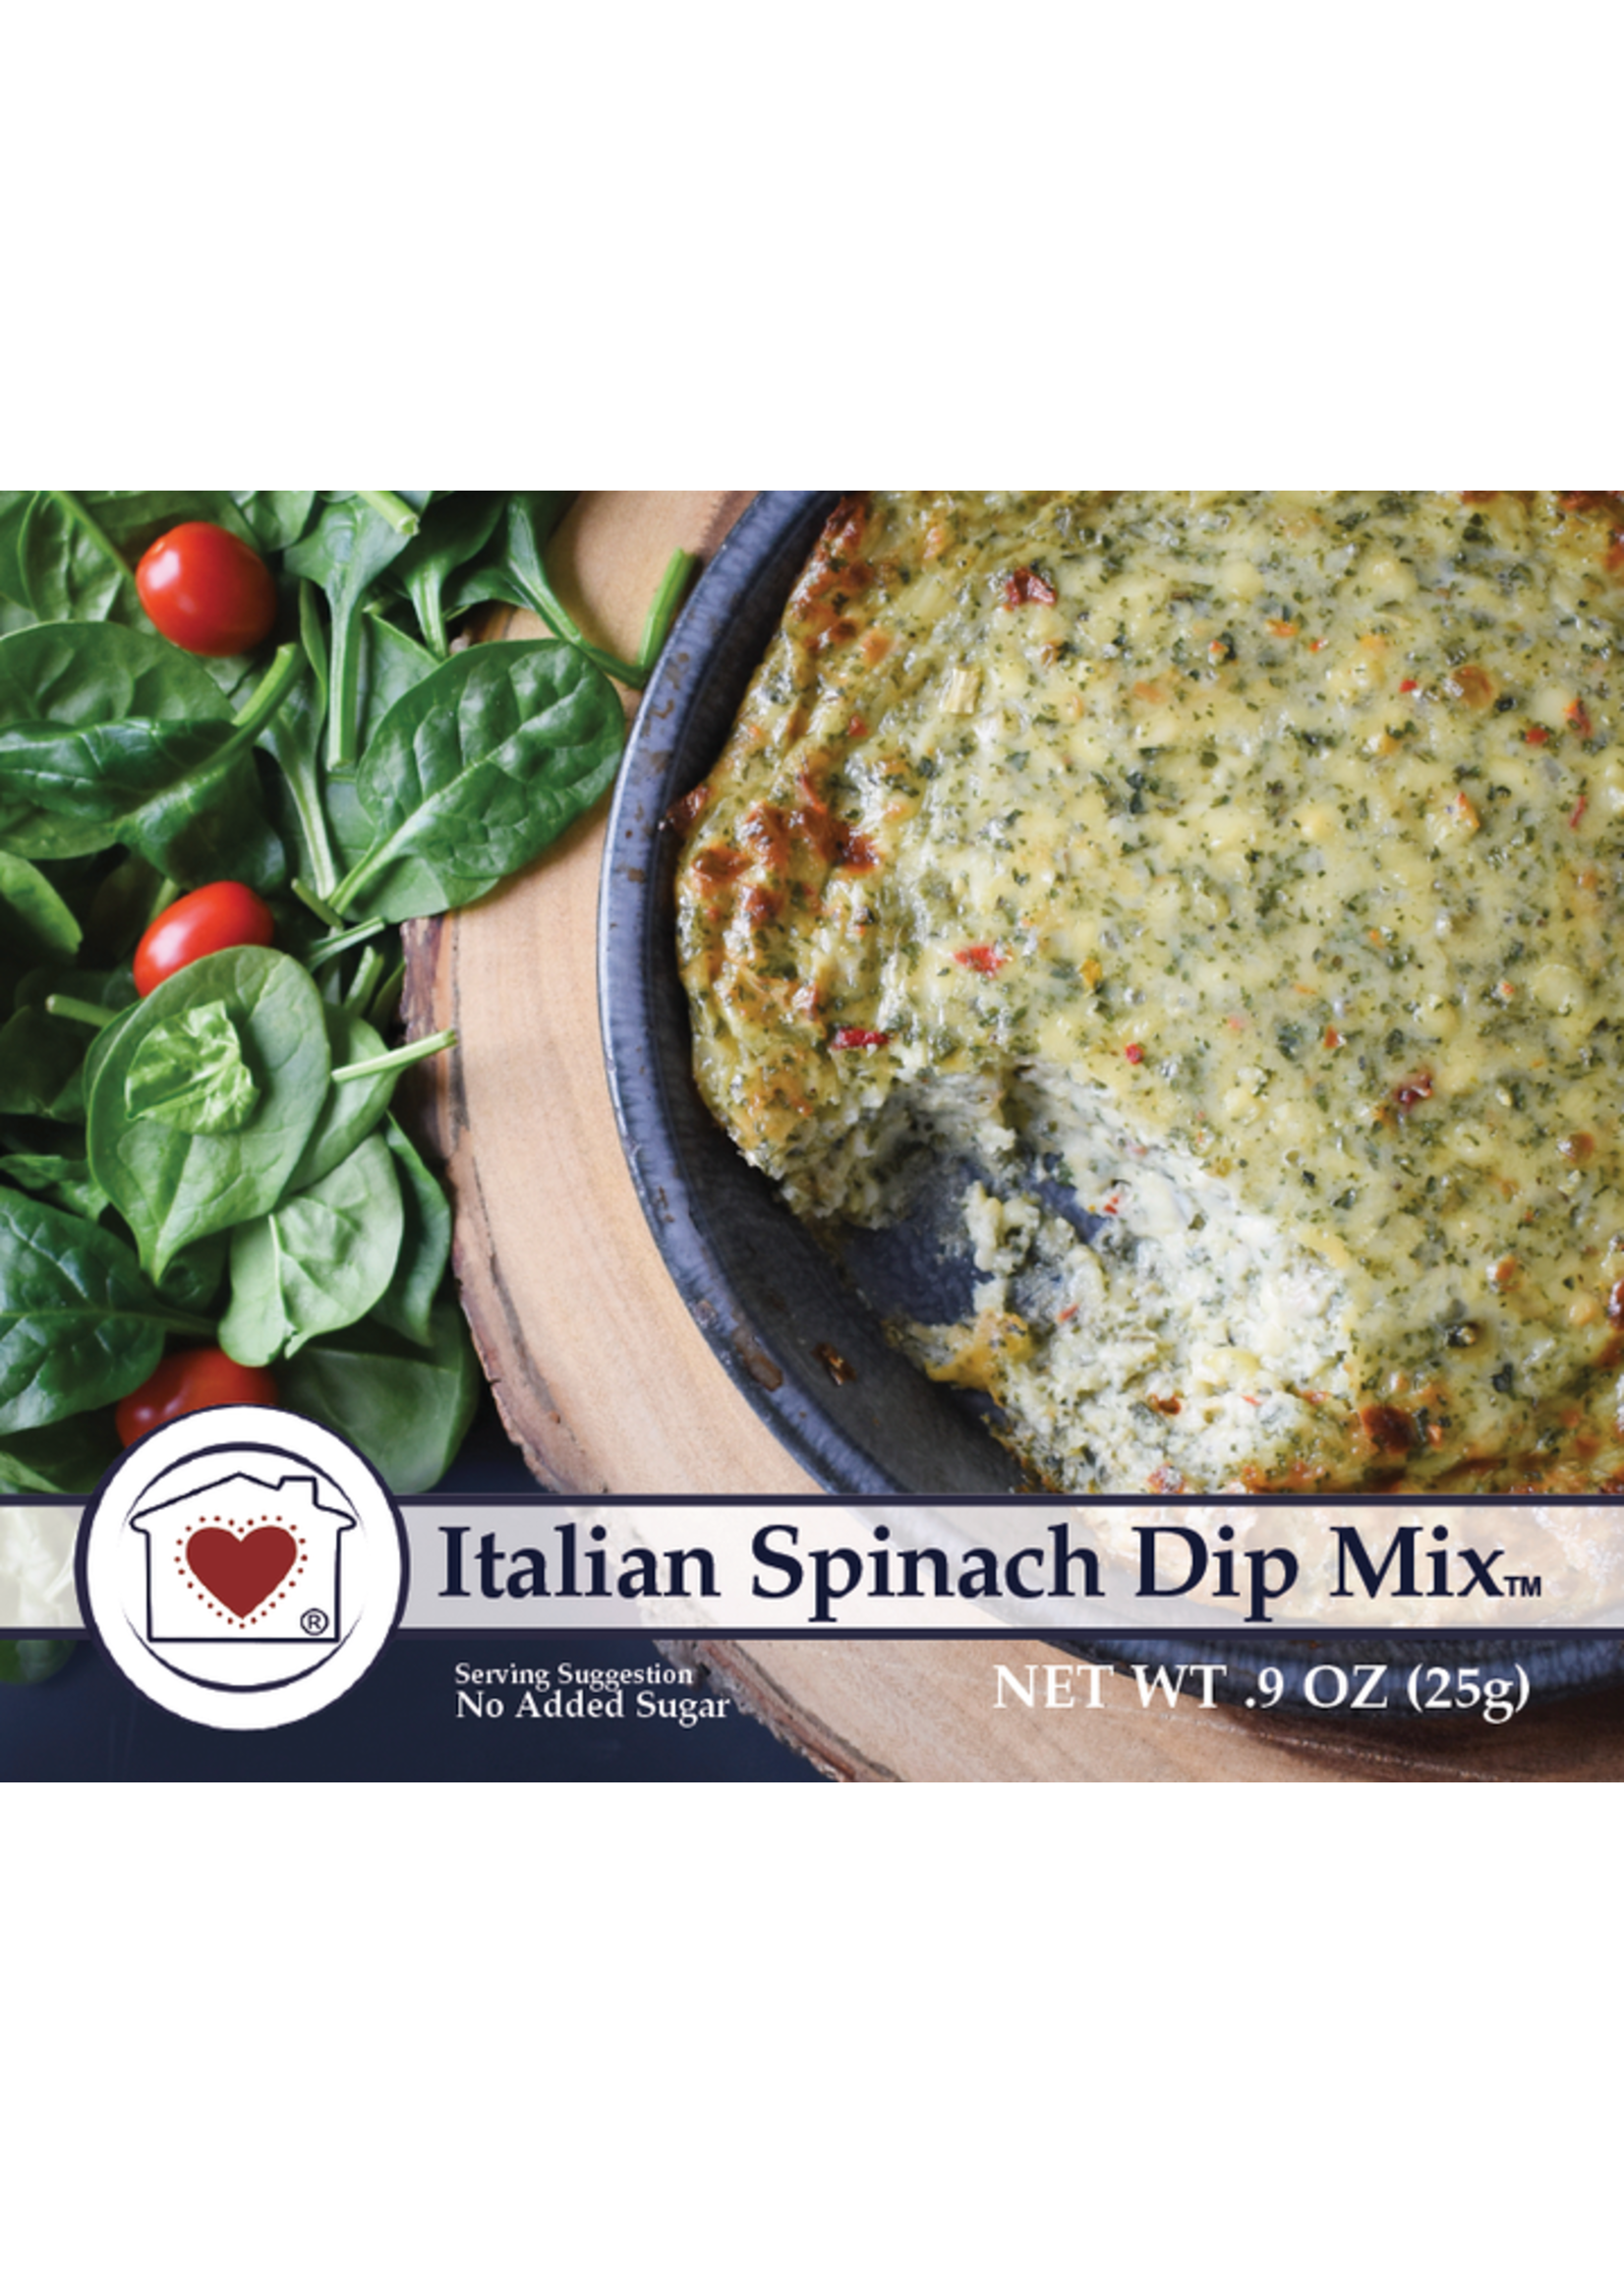 Country Home Creations Italian Spinach Dip Mix